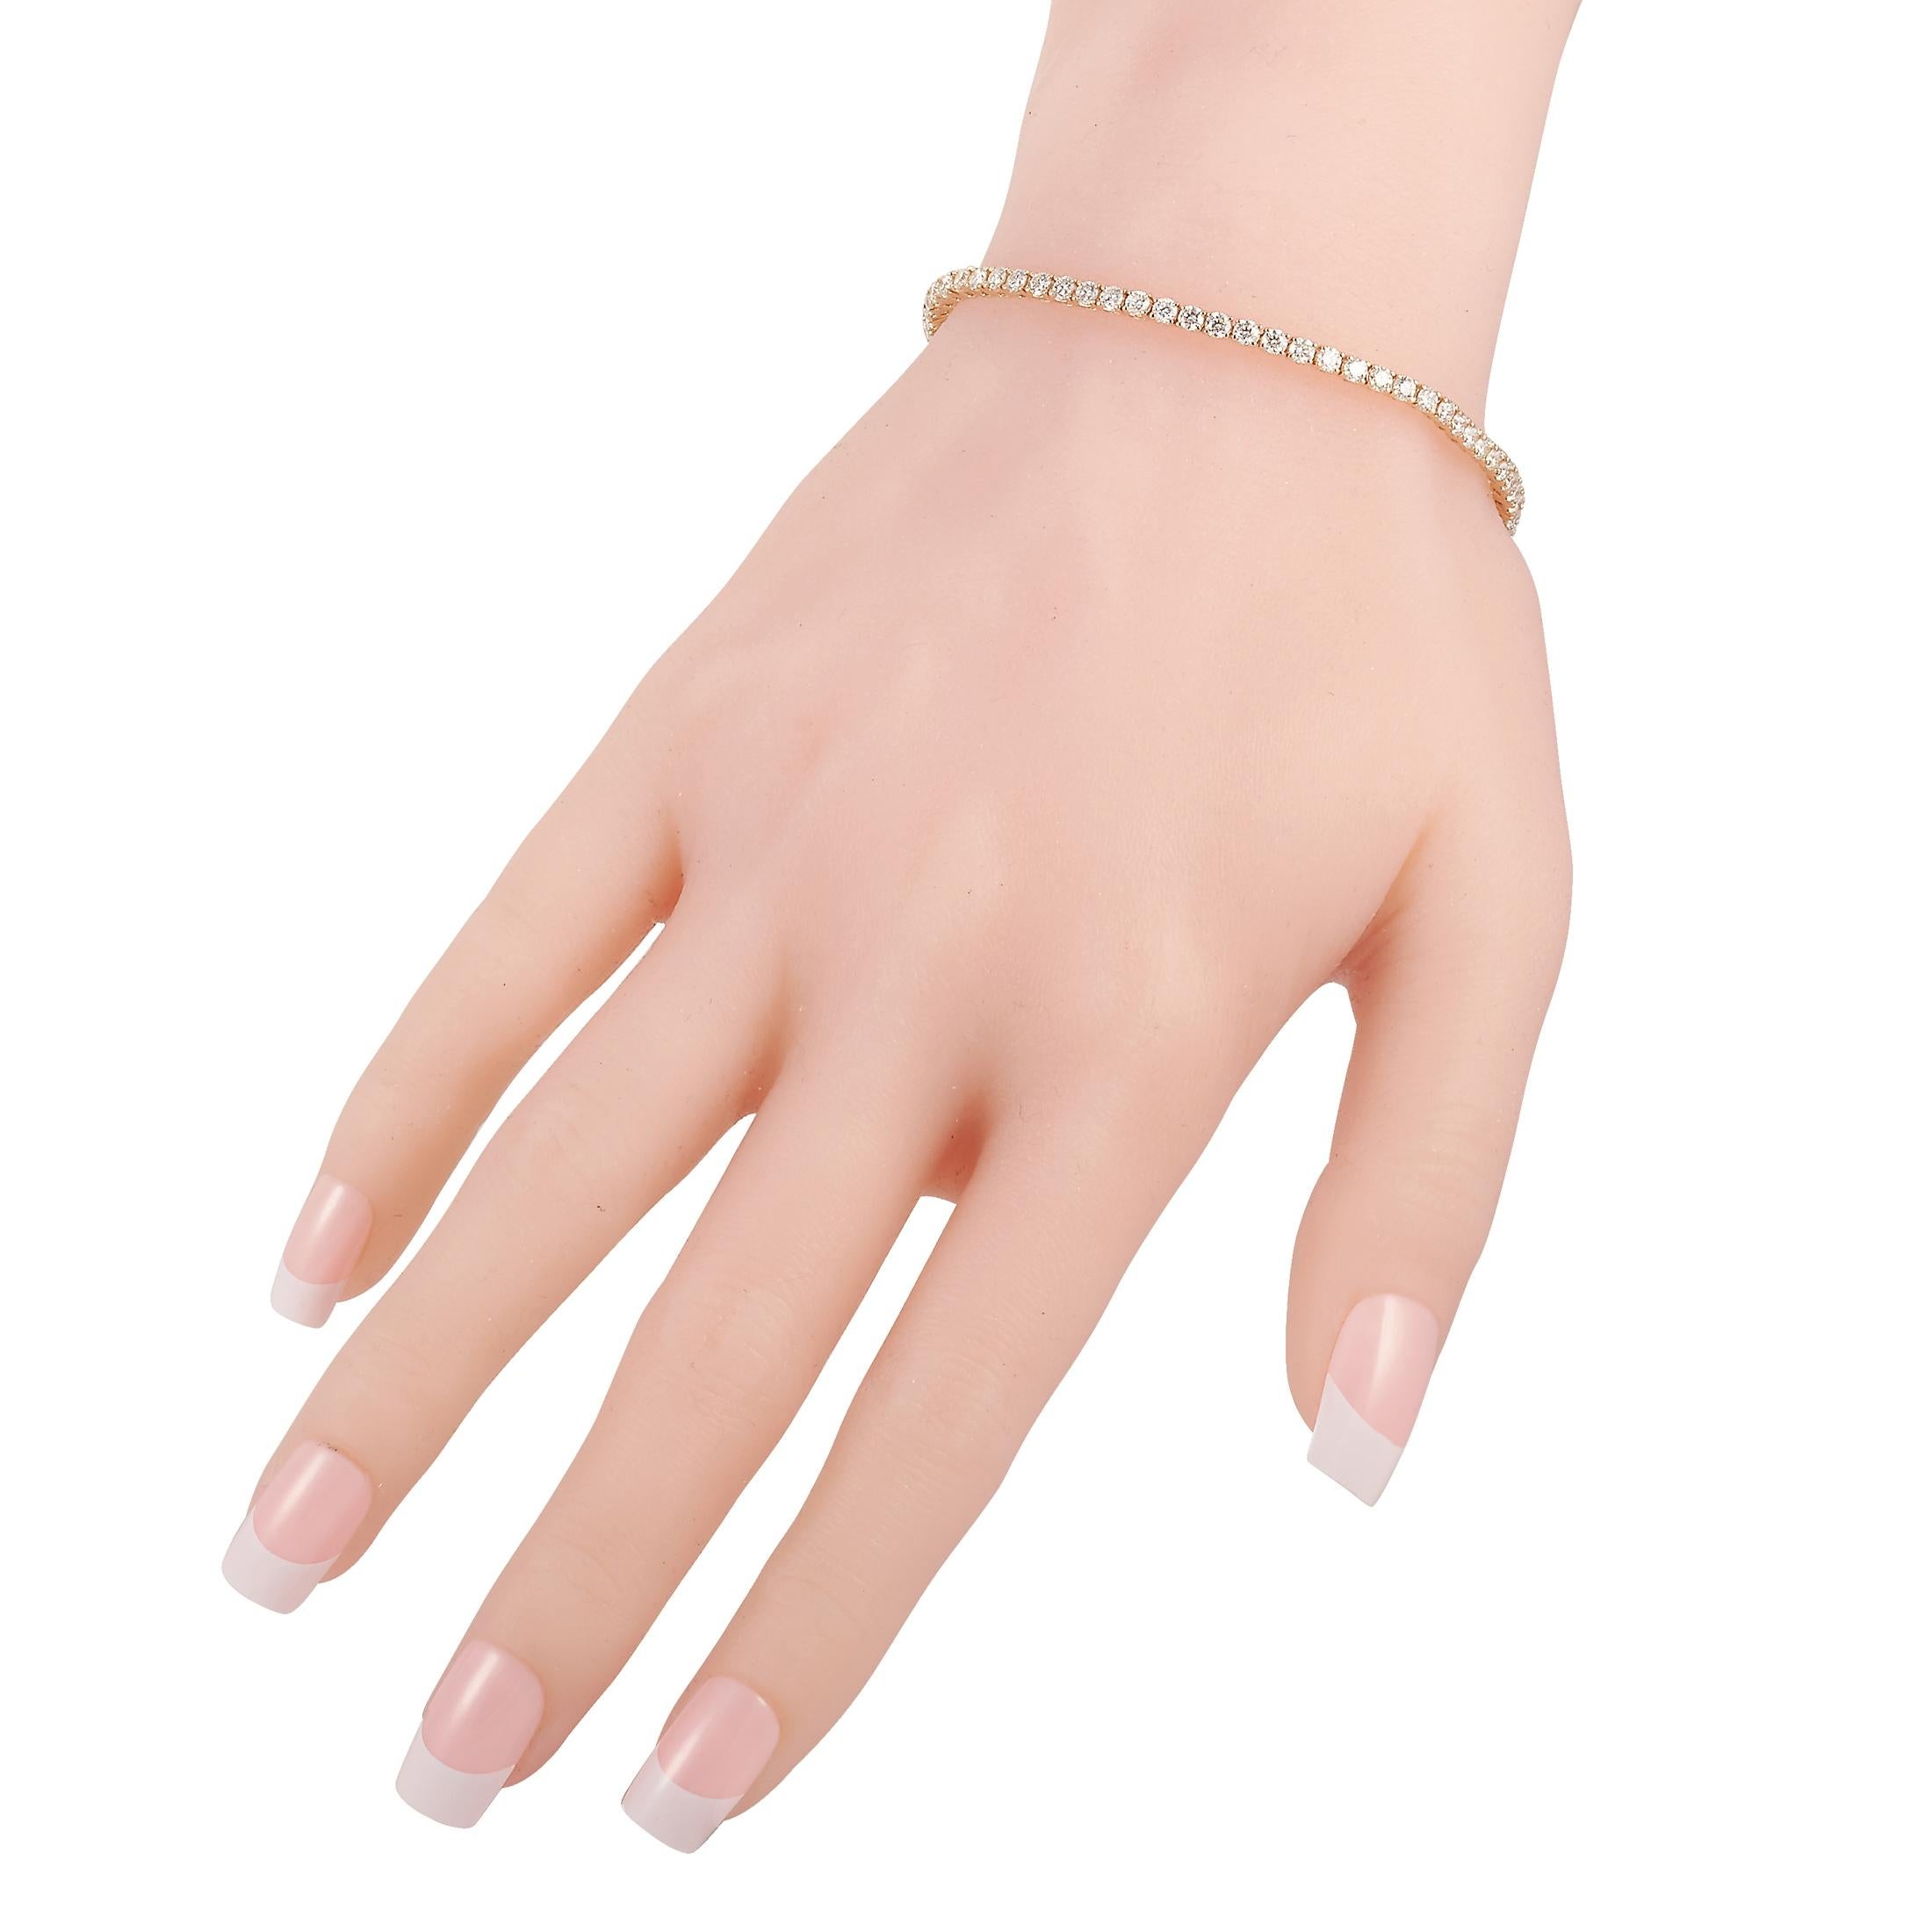 This LB Exclusive tennis bracelet is made of 14K yellow gold and embellished with diamonds that amount to 2.94 carats. The bracelet weighs 7.3 grams and measures 7.50” in length.
 
 Offered in brand new condition, this jewelry piece includes a